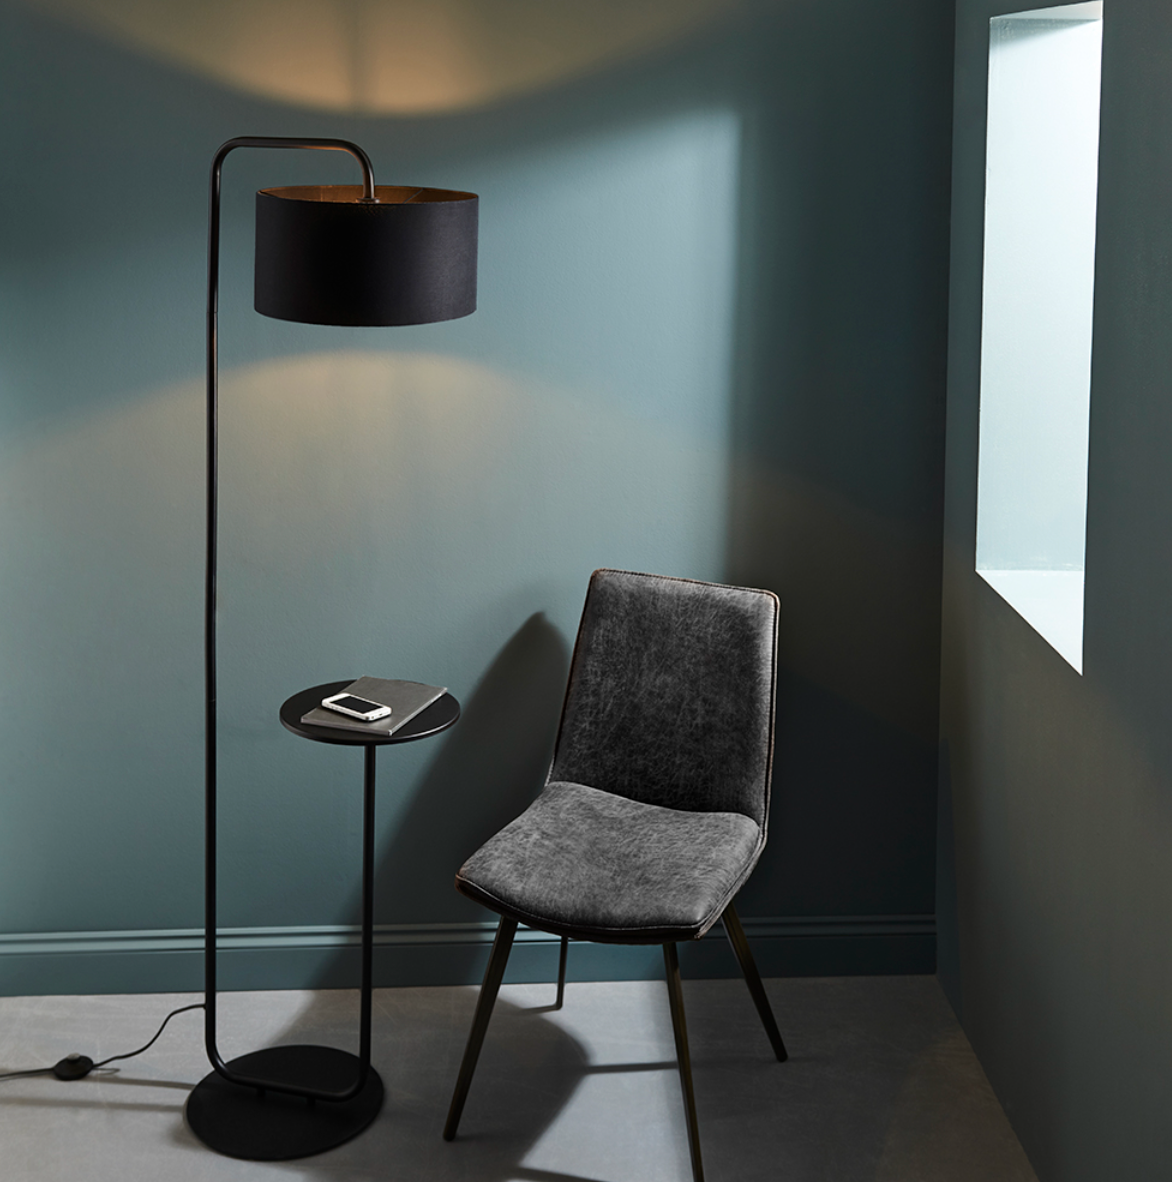 Black Floor Light With Table And Black Shade - ID 11748